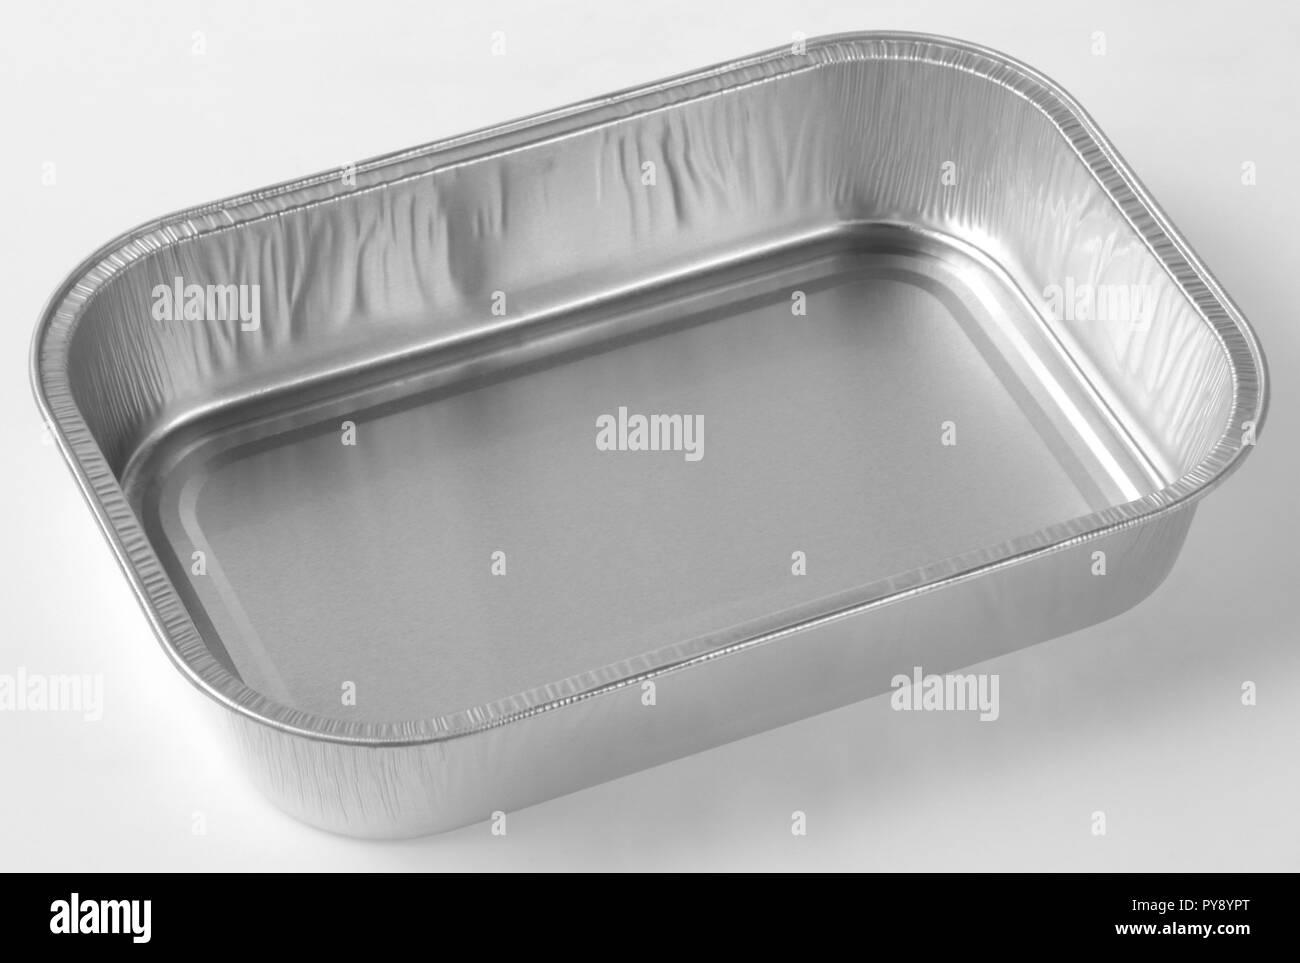 Baking foil plate isolated on white Stock Photo